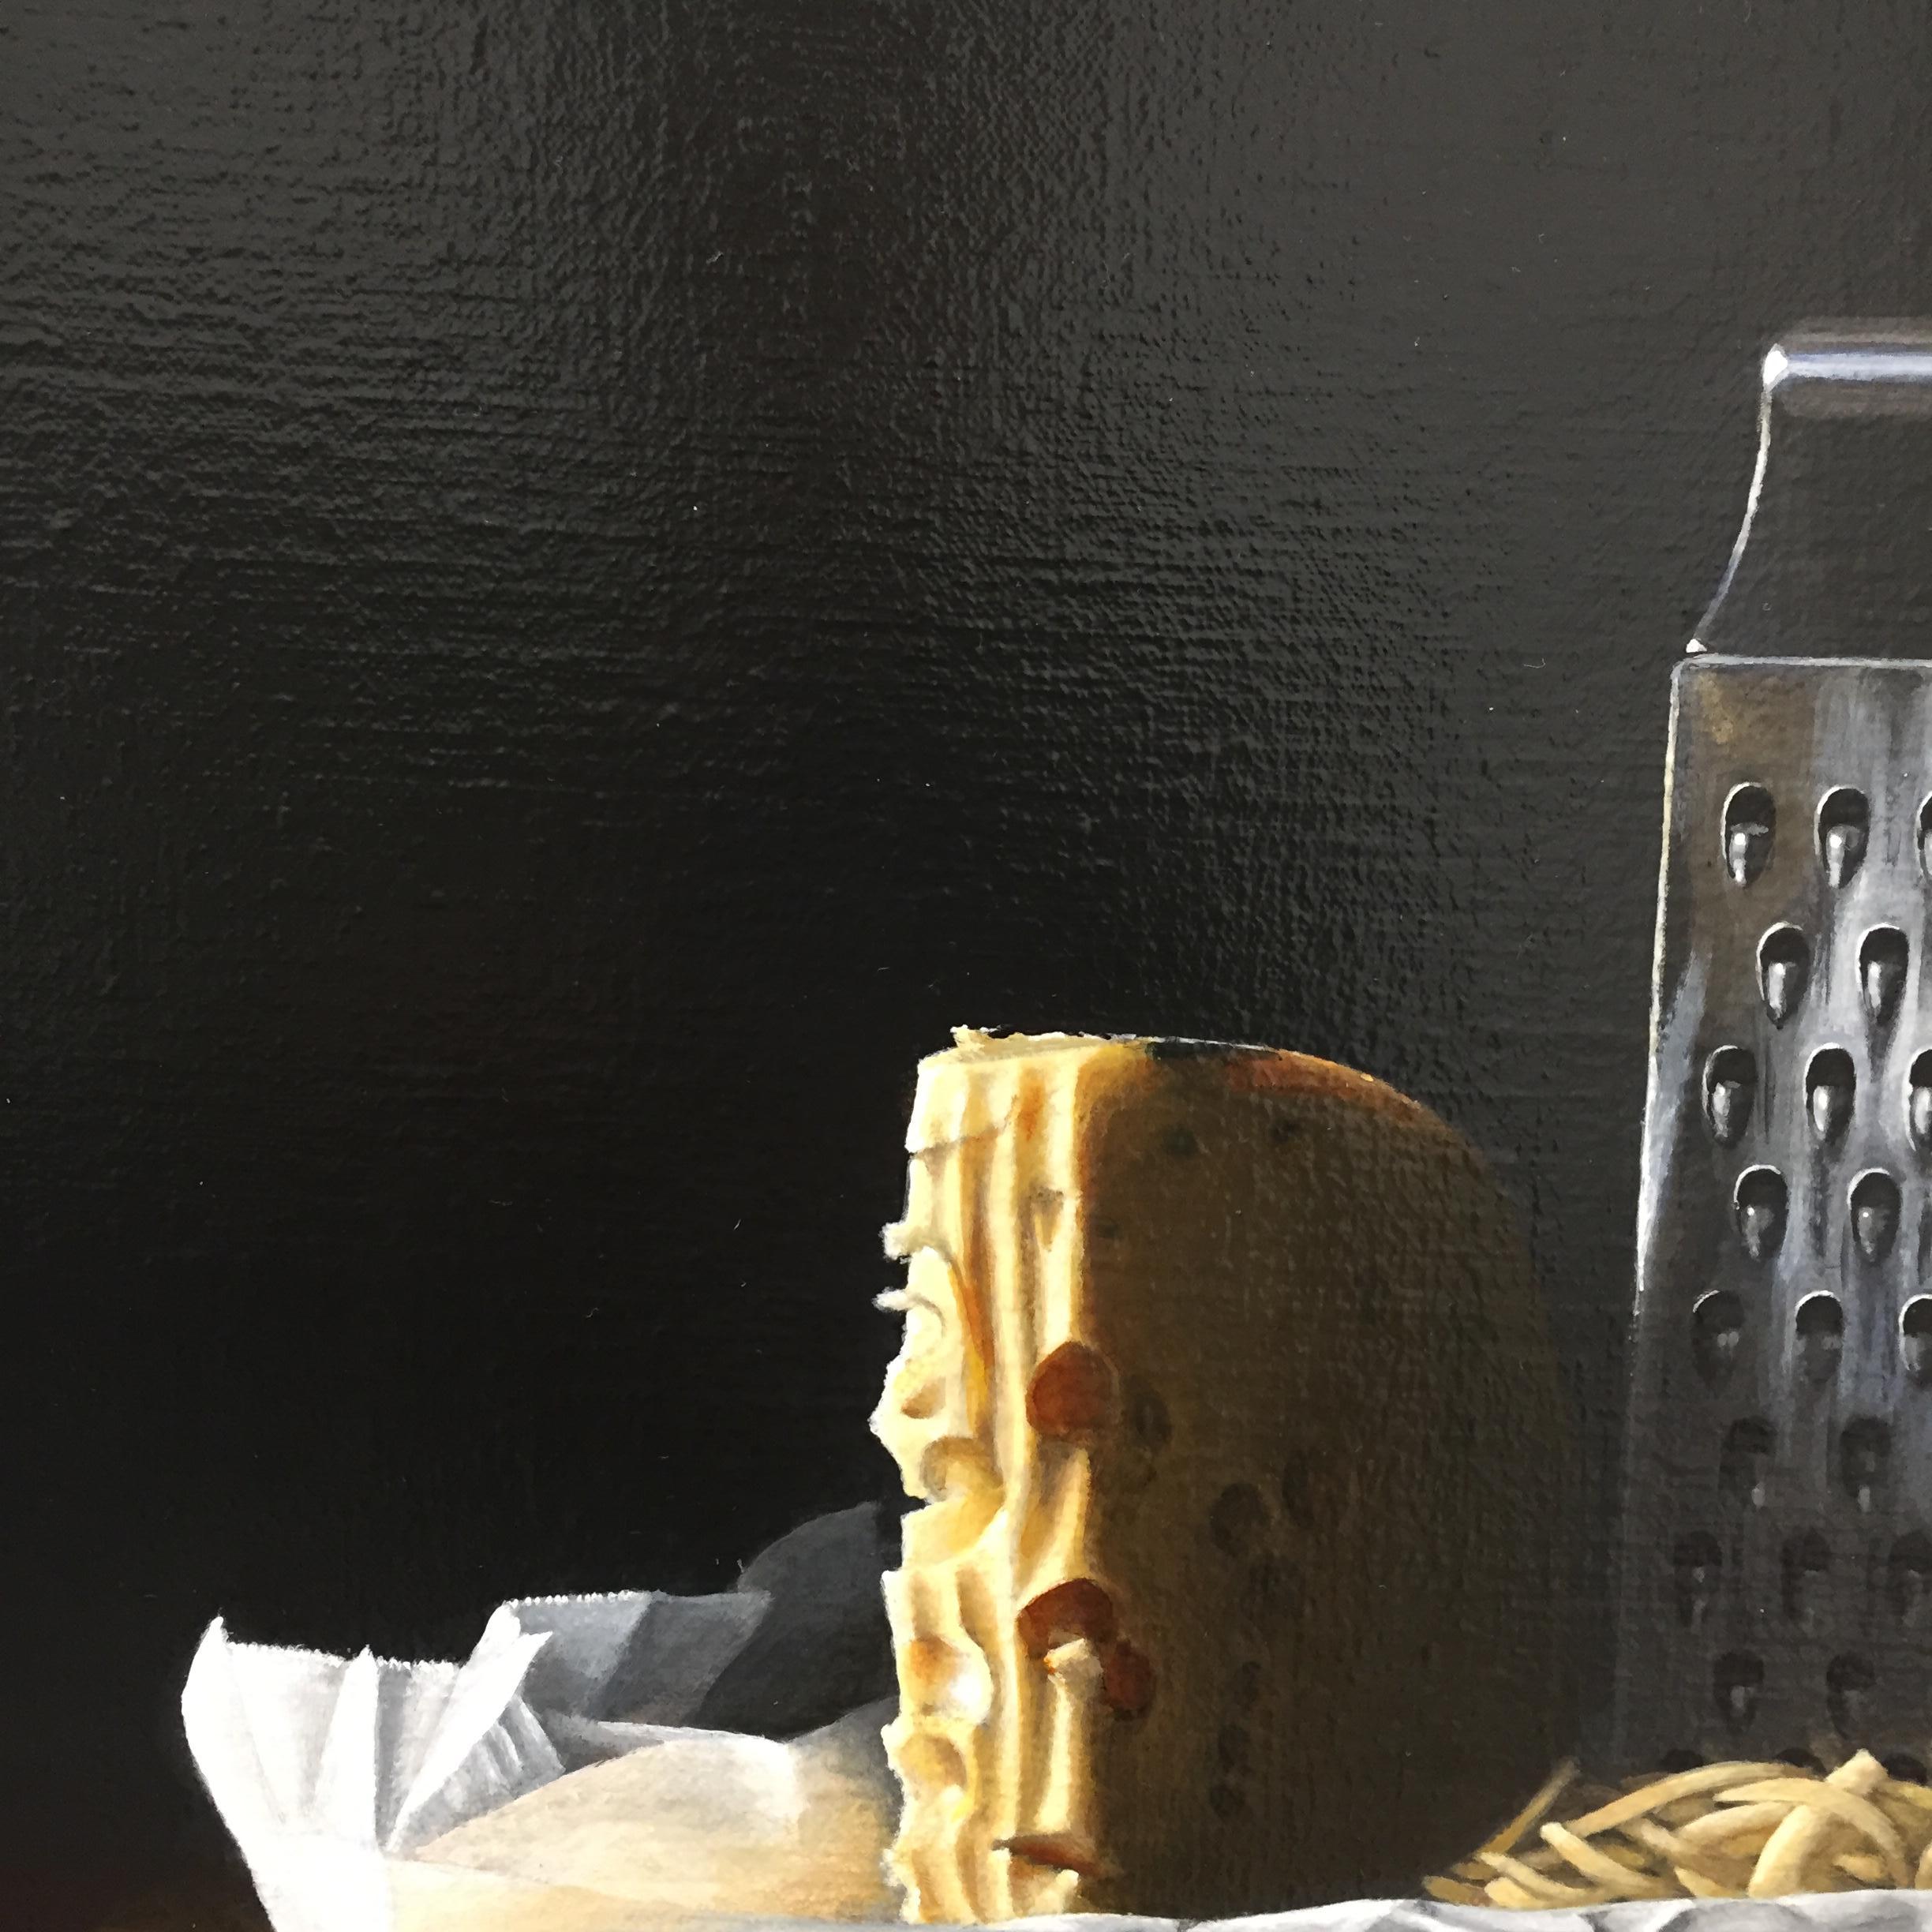 Grated Cheese- 21st Century Contemporary Still-life Painting by Heidi von Faber 2